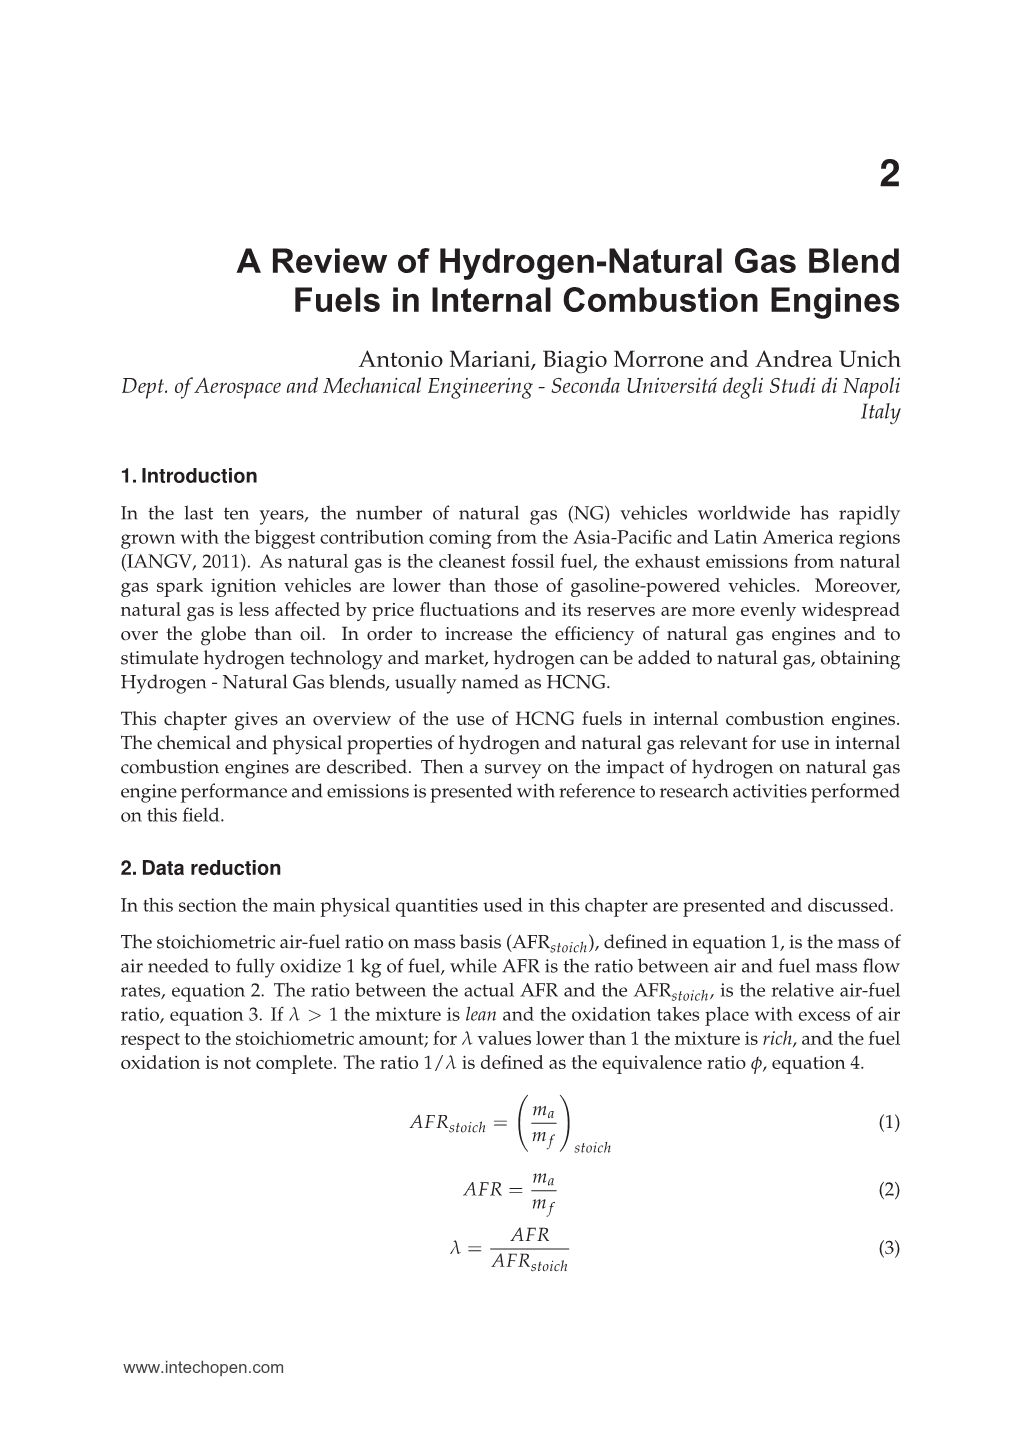 A Review of Hydrogen-Natural Gas Blend Fuels in Internal Combustion Engines